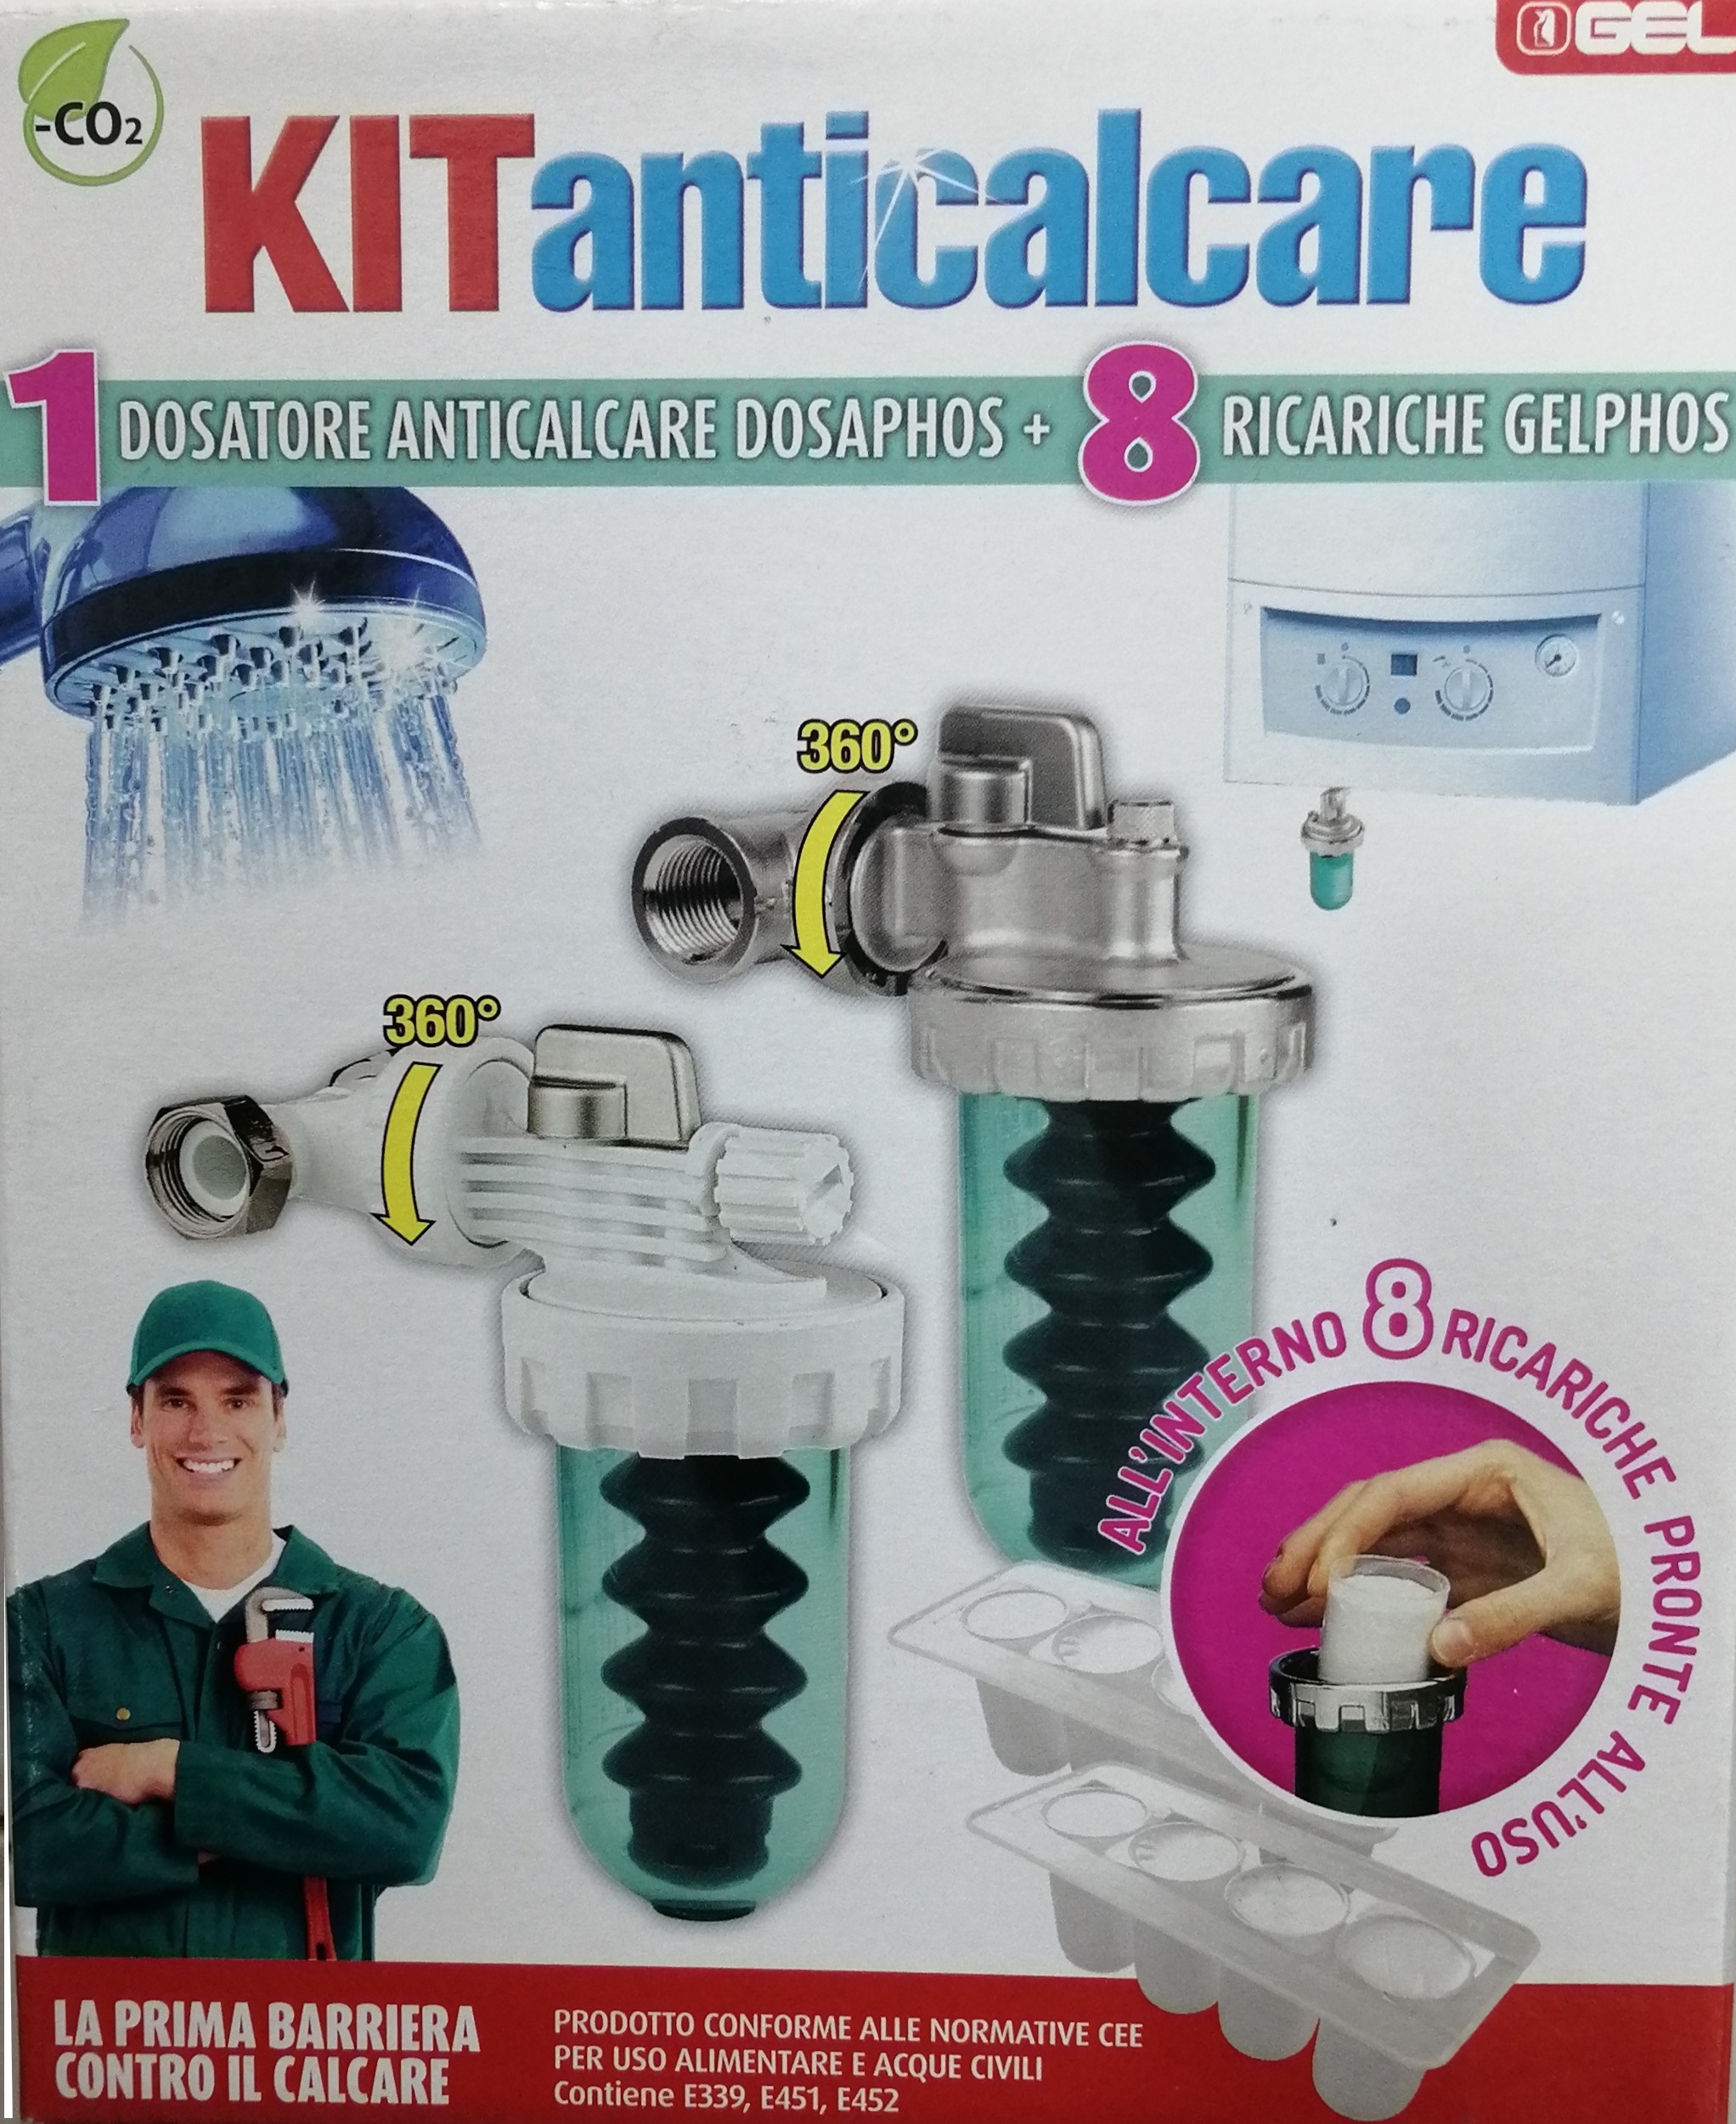 POLİFOSFAT filter "GEL ANTICALCARE " – made in Italy.